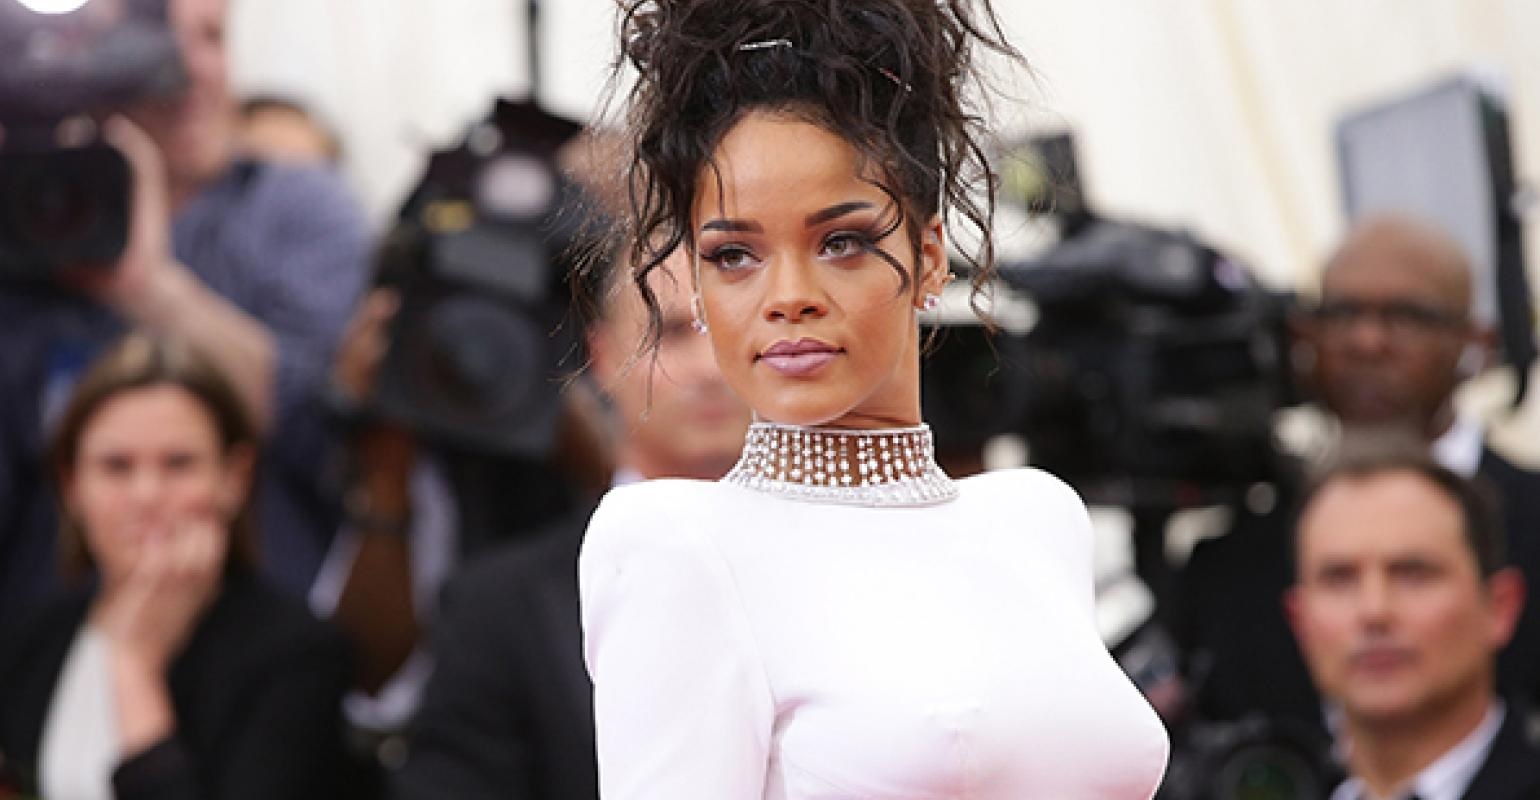 Find Out How Rihanna becomes youngest self-made billionaire woman in US at age 34